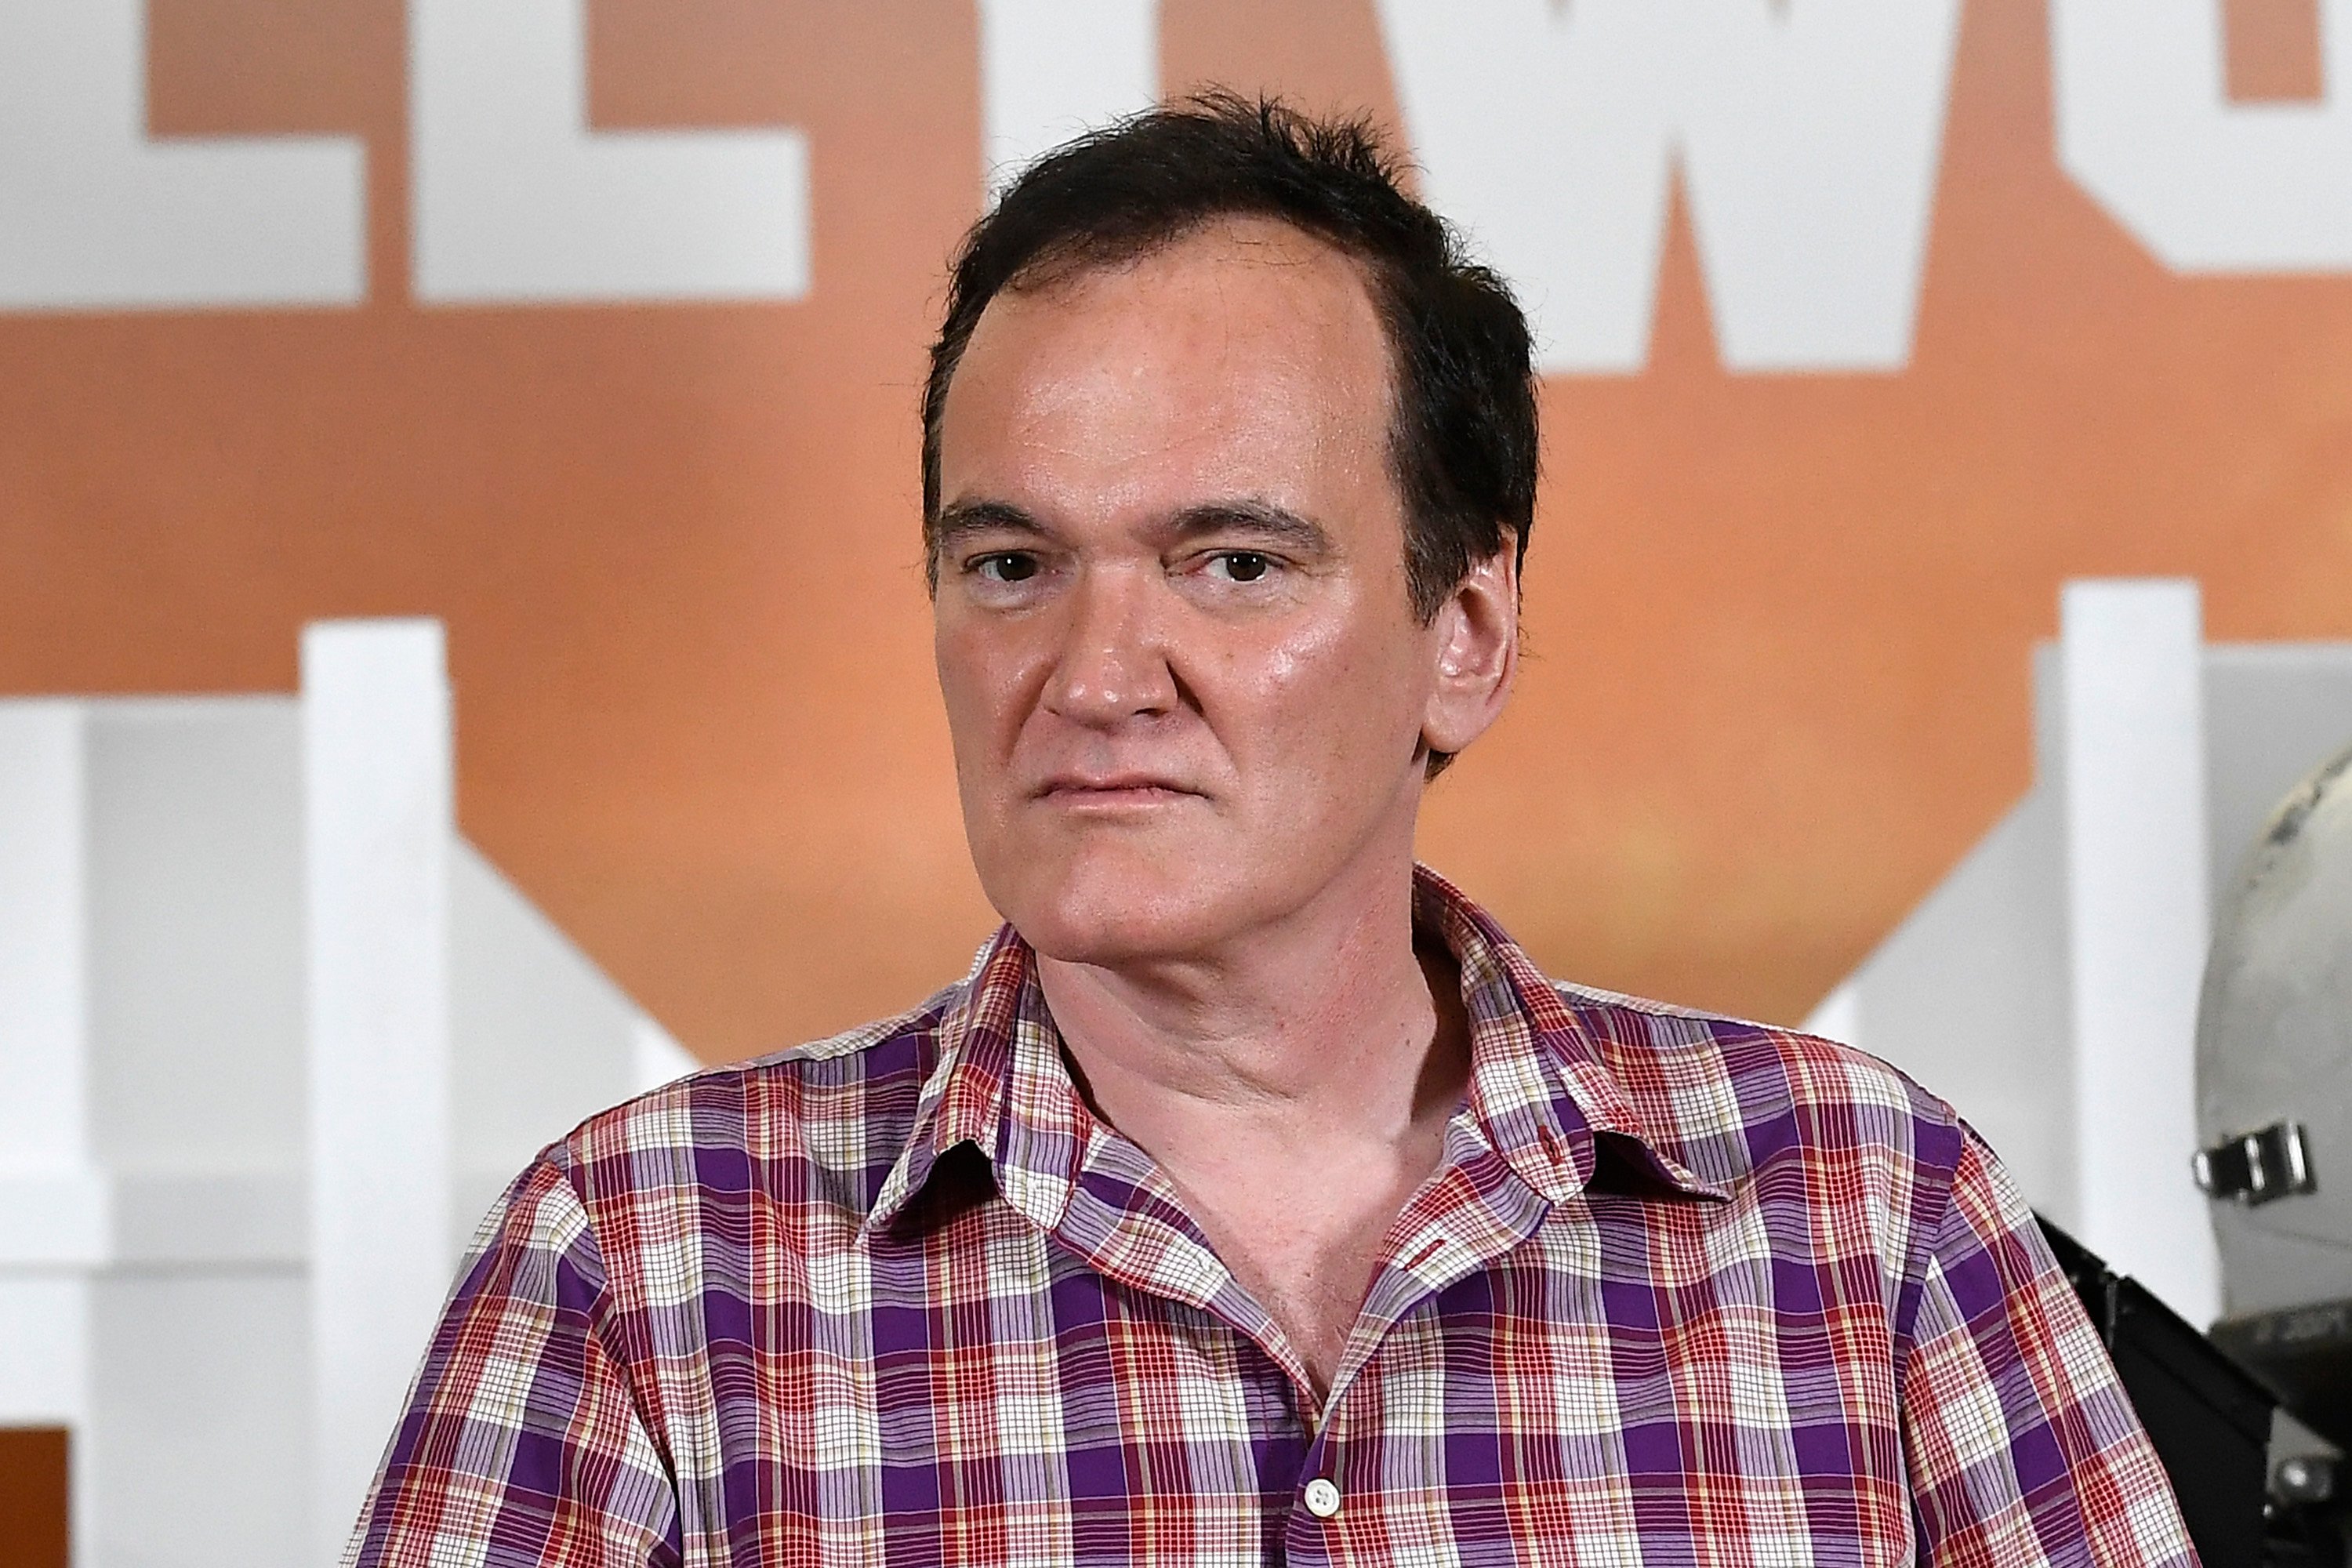 Quentin Tarantino in front of a poster